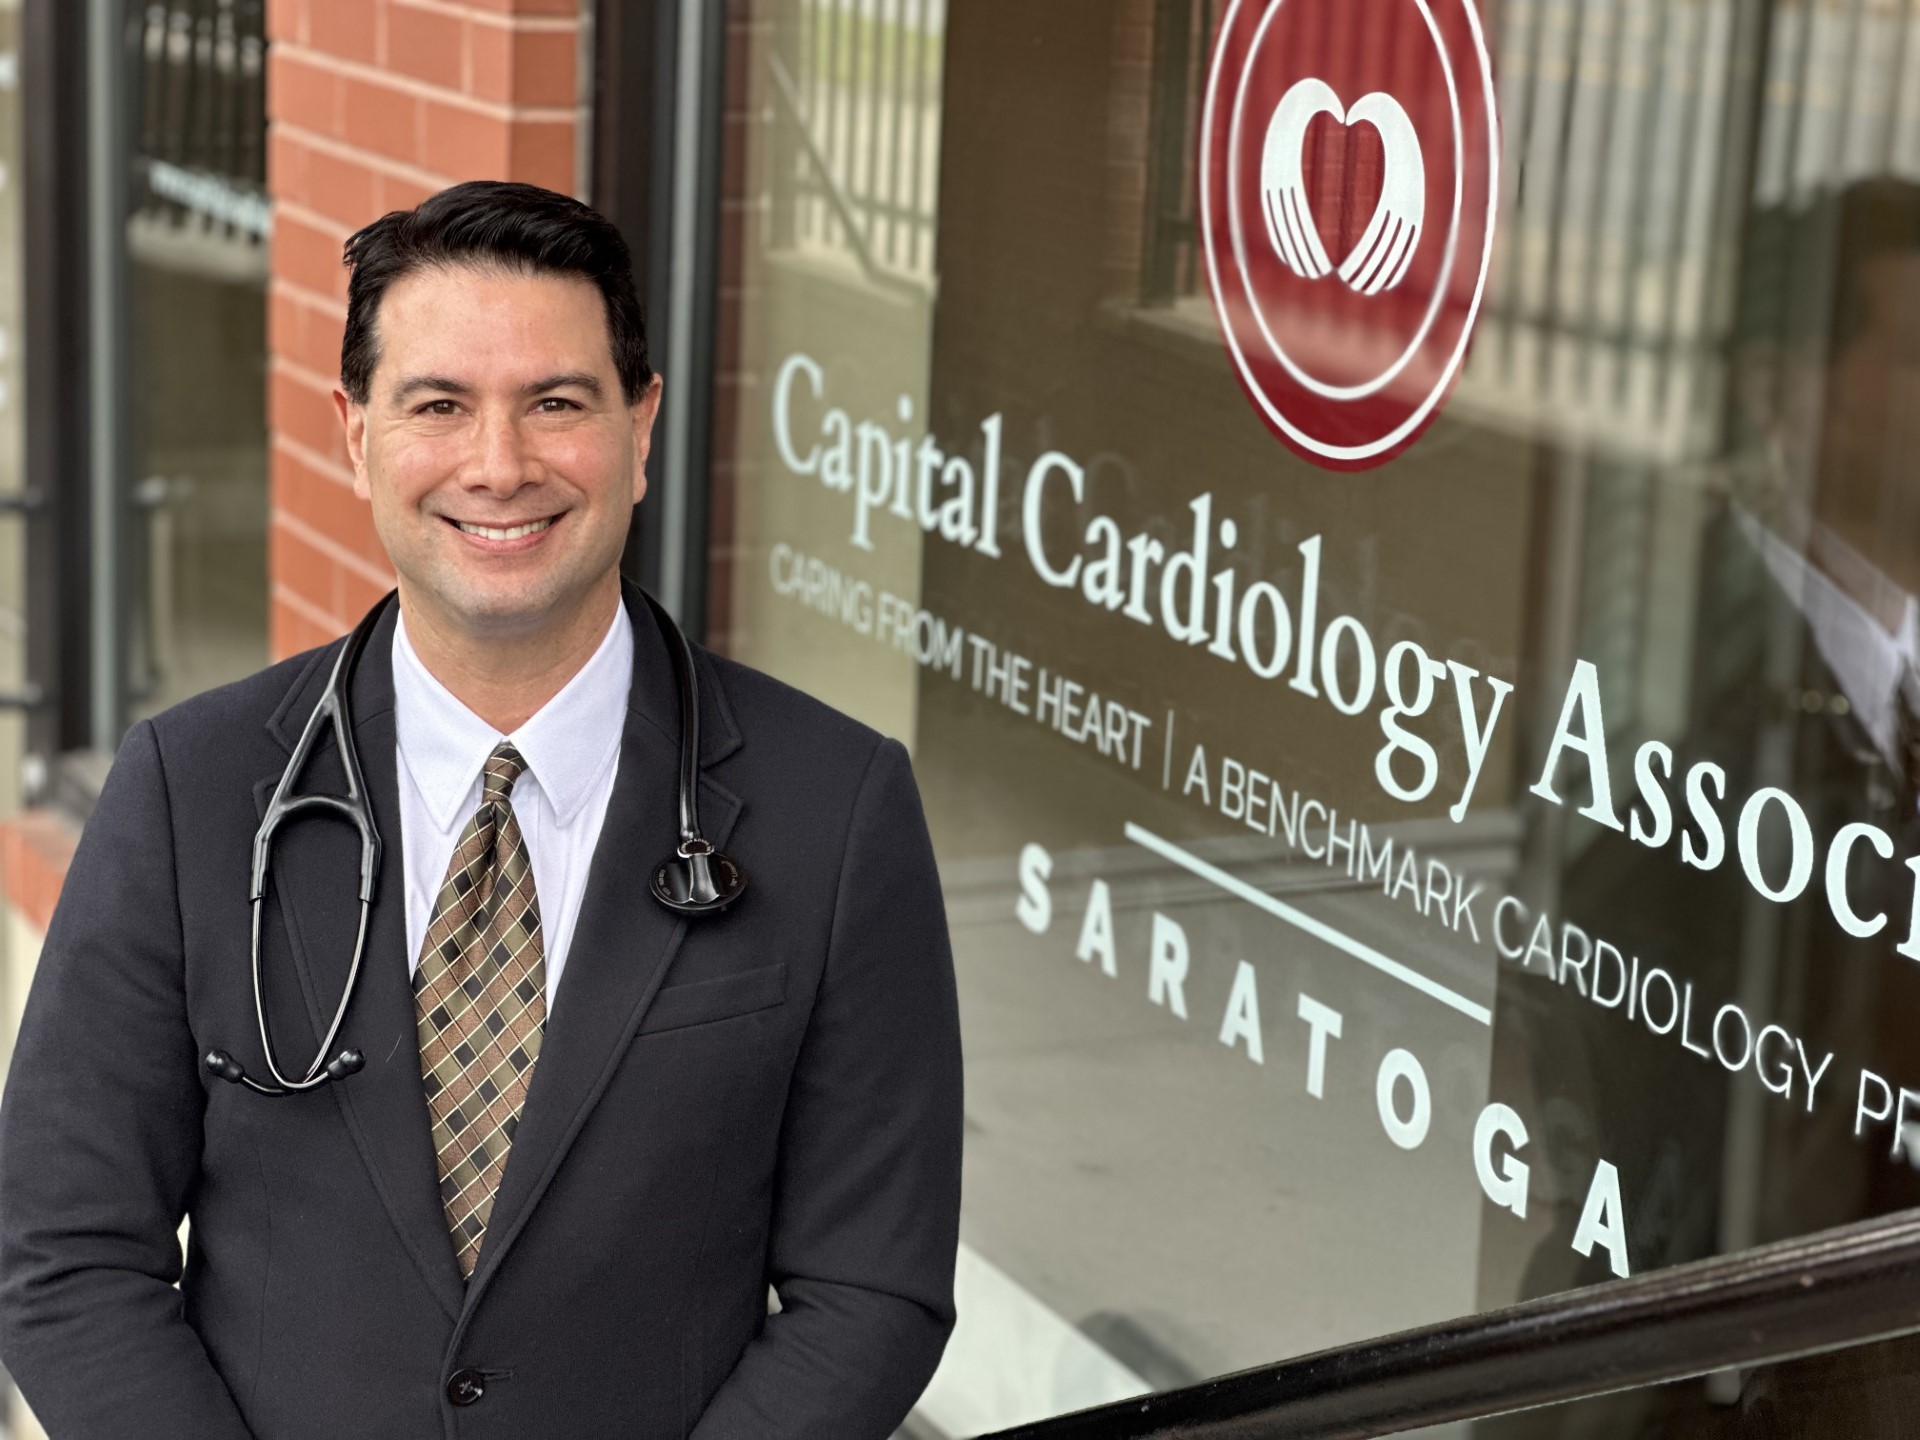 Image for Capital Cardiology Associates Expands Presence with New Saratoga Springs Location